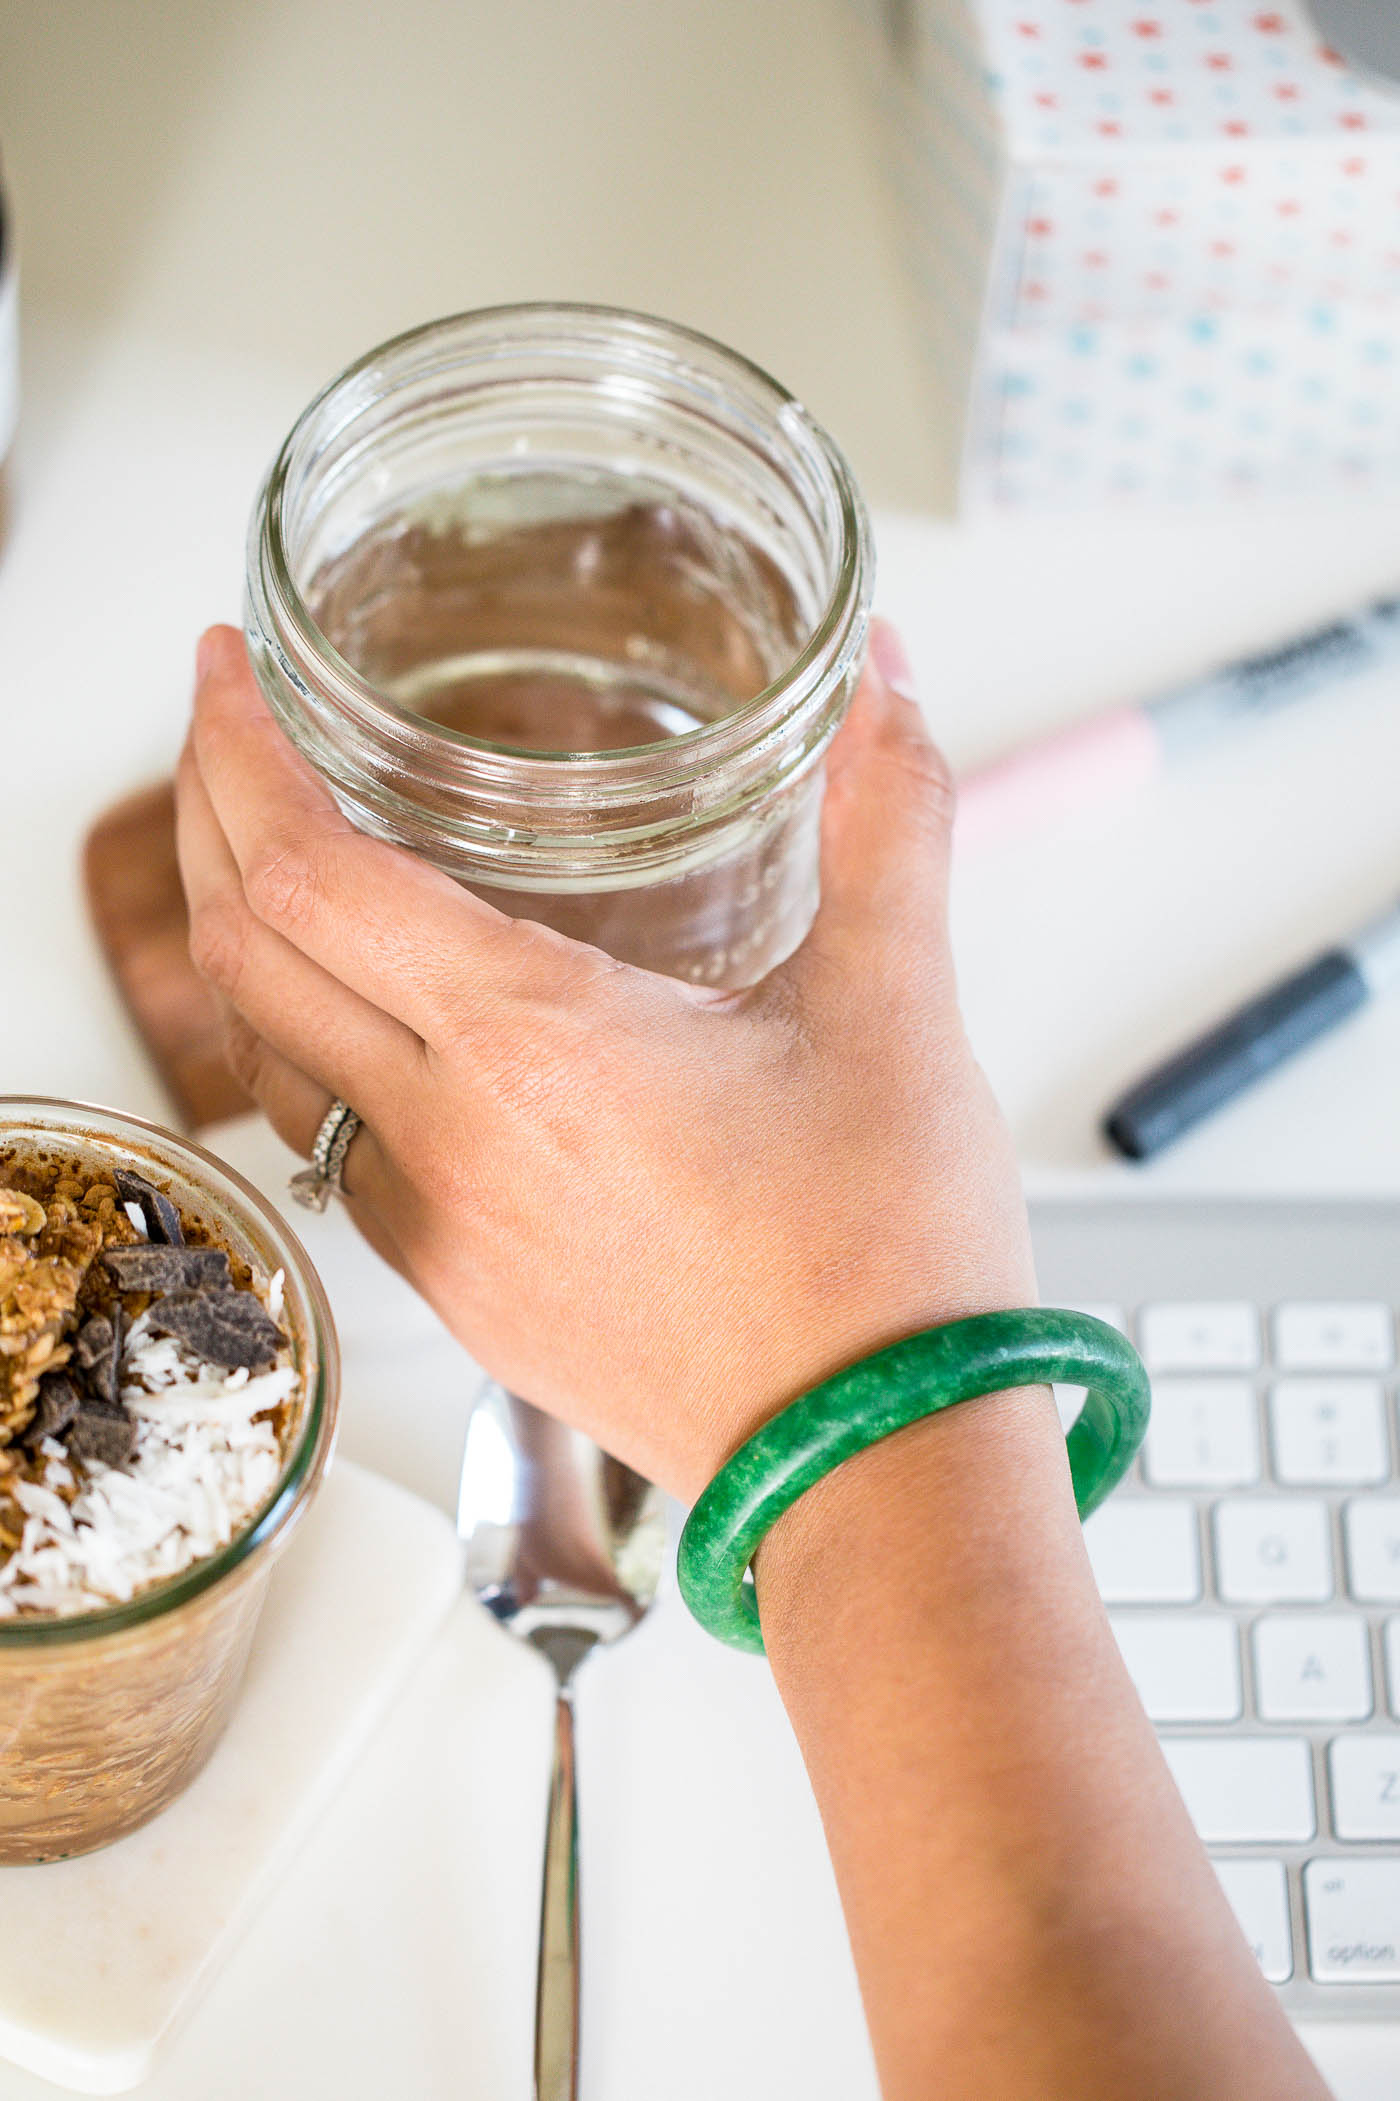 5 tips for a healthy & productive morning while working from home, plus a bonus chocolate coconut cold brew overnight oats recipe! #playswellwithbutter #creativepreneur #workfromhome #morningroutine #healthymorning #healthybreakfast #easybreakfastrecipe